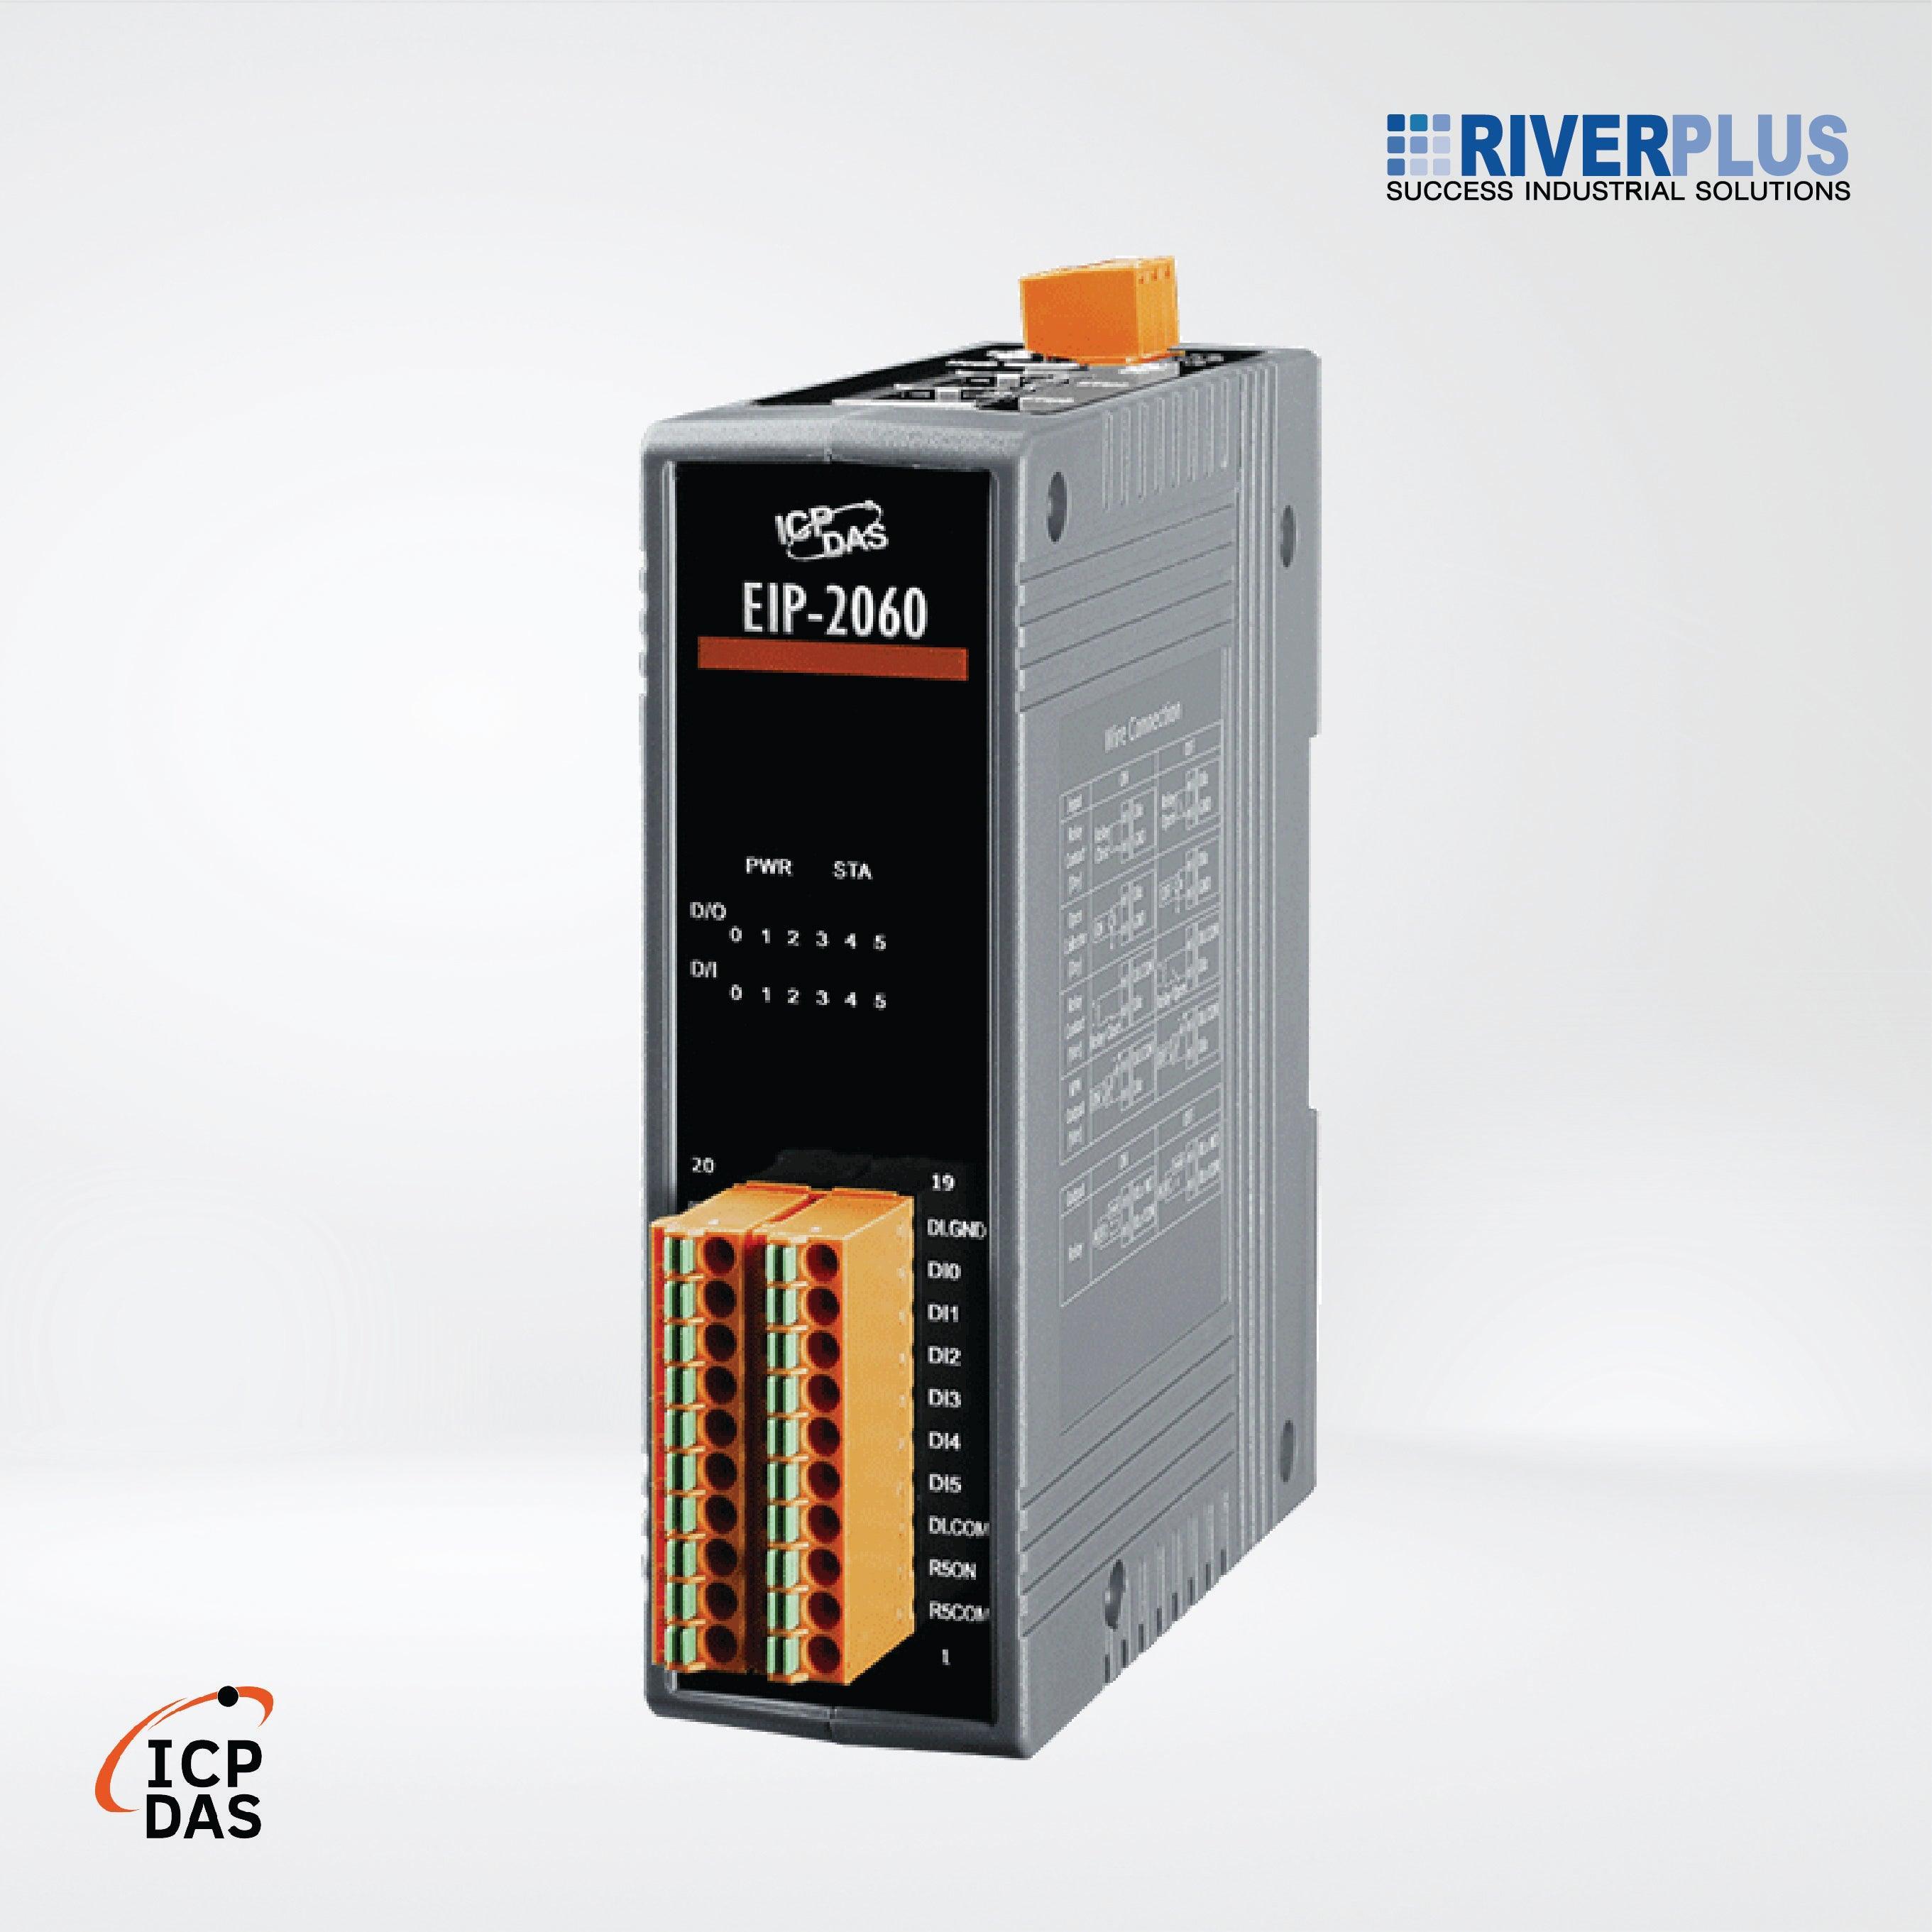 EIP-2060 EtherNet/IP Module (Isolated 6-ch DI and 6-ch Relay Output) - Riverplus